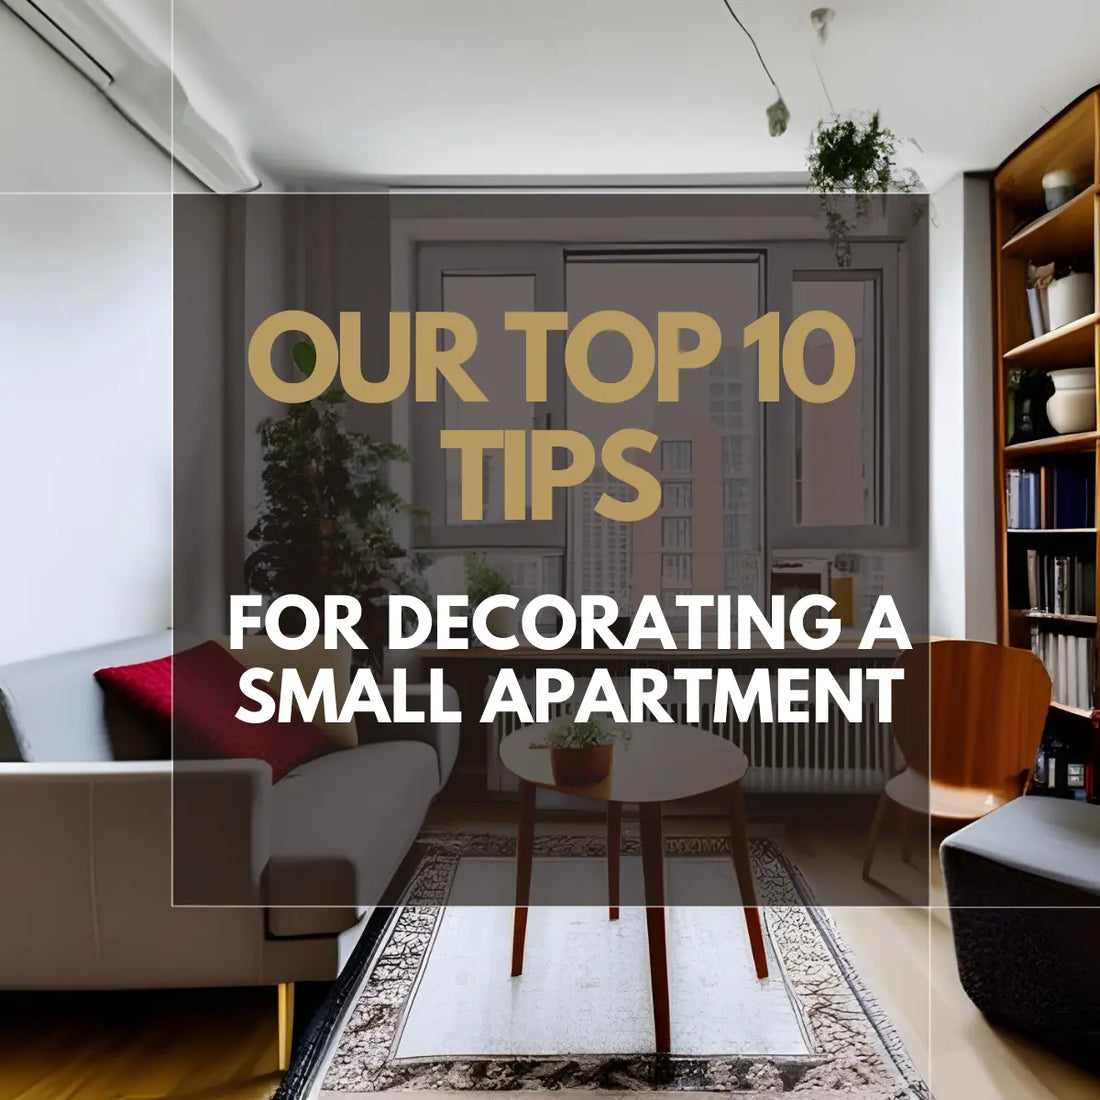 Our Top 10 Tips for Decorating a Small Apartment